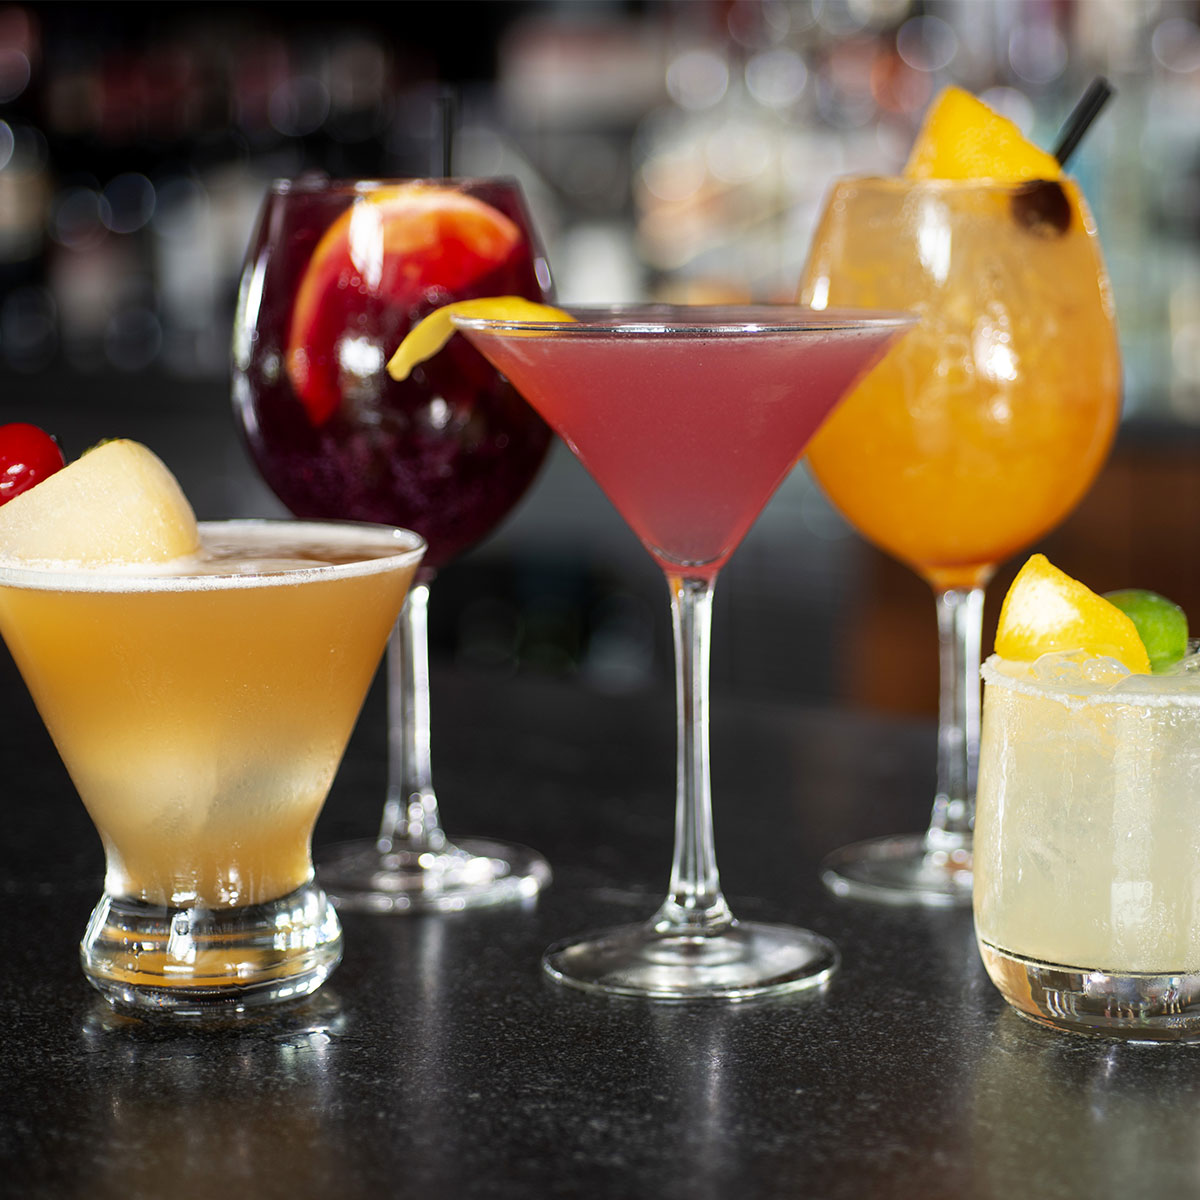 A selection of different colored cocktails with fruit adornments at Burtons Burlington location